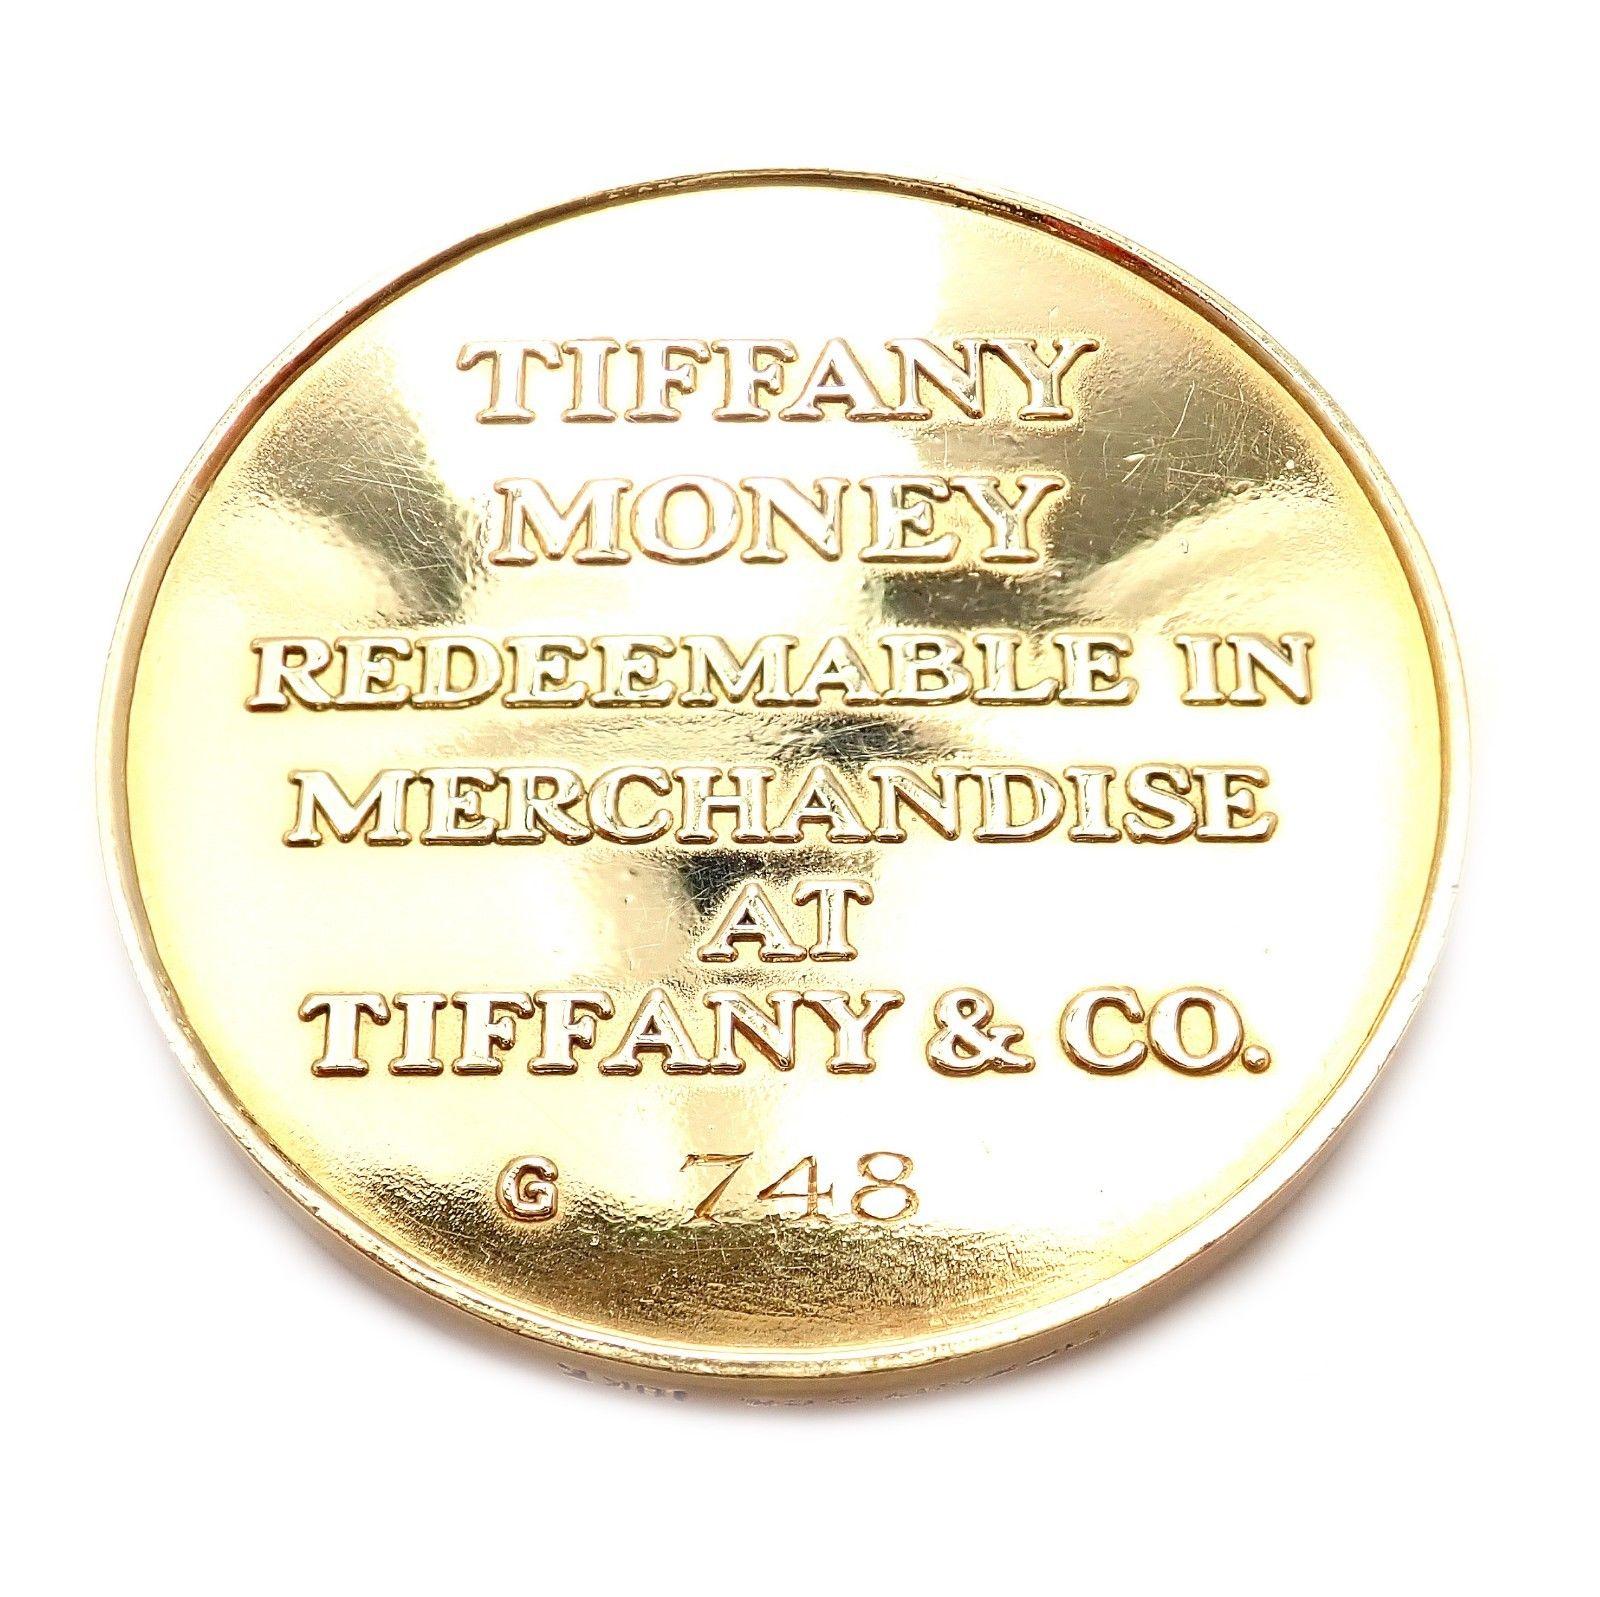 18k Solid Yellow Gold Vintage $1000 Tiffany Money Coin by Tiffany & Co.
Details:
Dimensions: coin measures 1 ¼ inches in diameter and 1/8 inch in depth
Weight: 32.1 grams
Stamped Hallmarks: Hallmarks:
One Thousand Dollars T&CO
TIFFANY MONEY